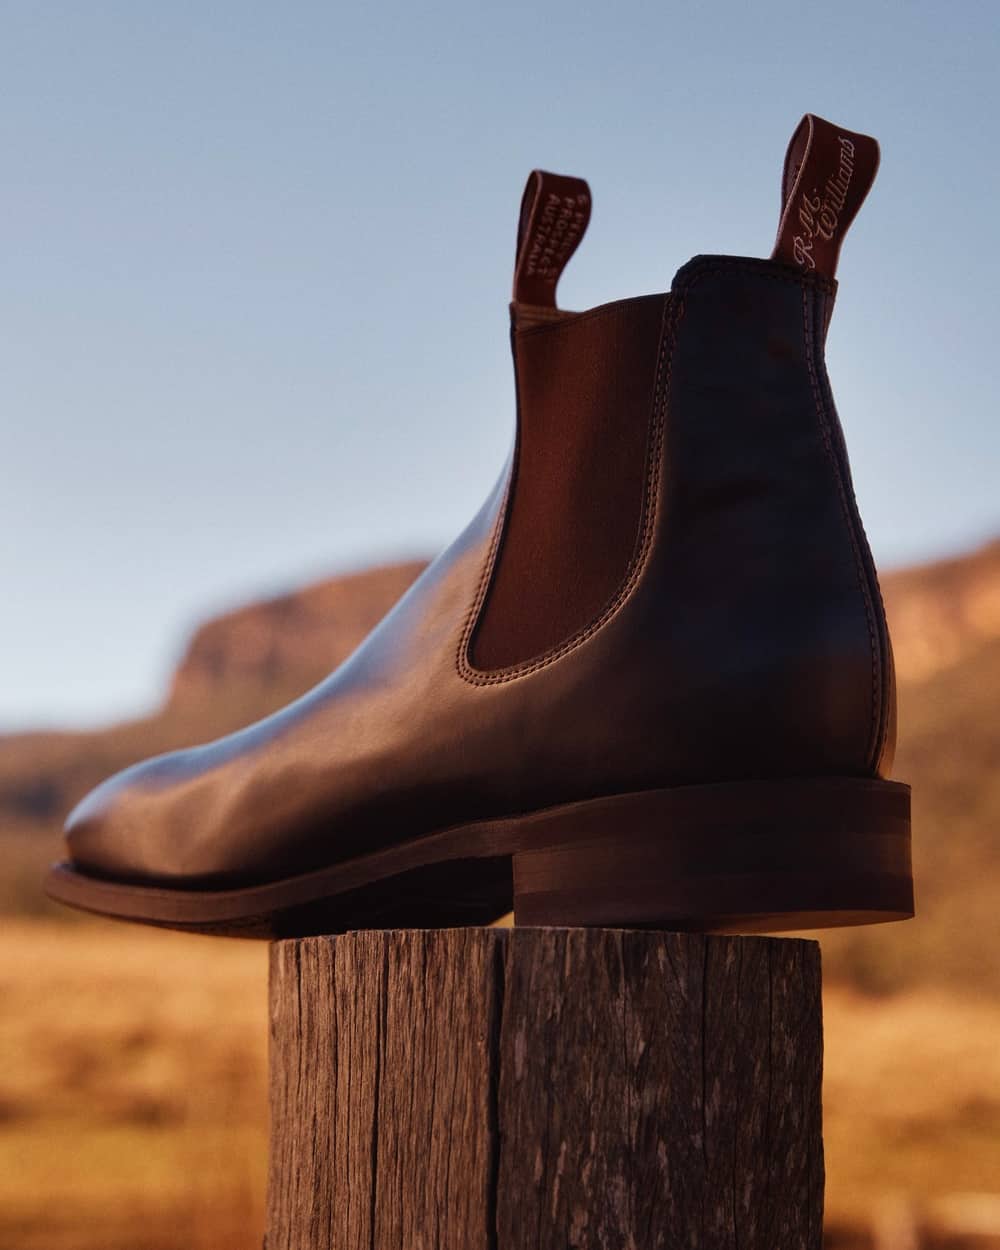 An R.M.Williams men's brown leather Chelsea boots outside on top of a fence post